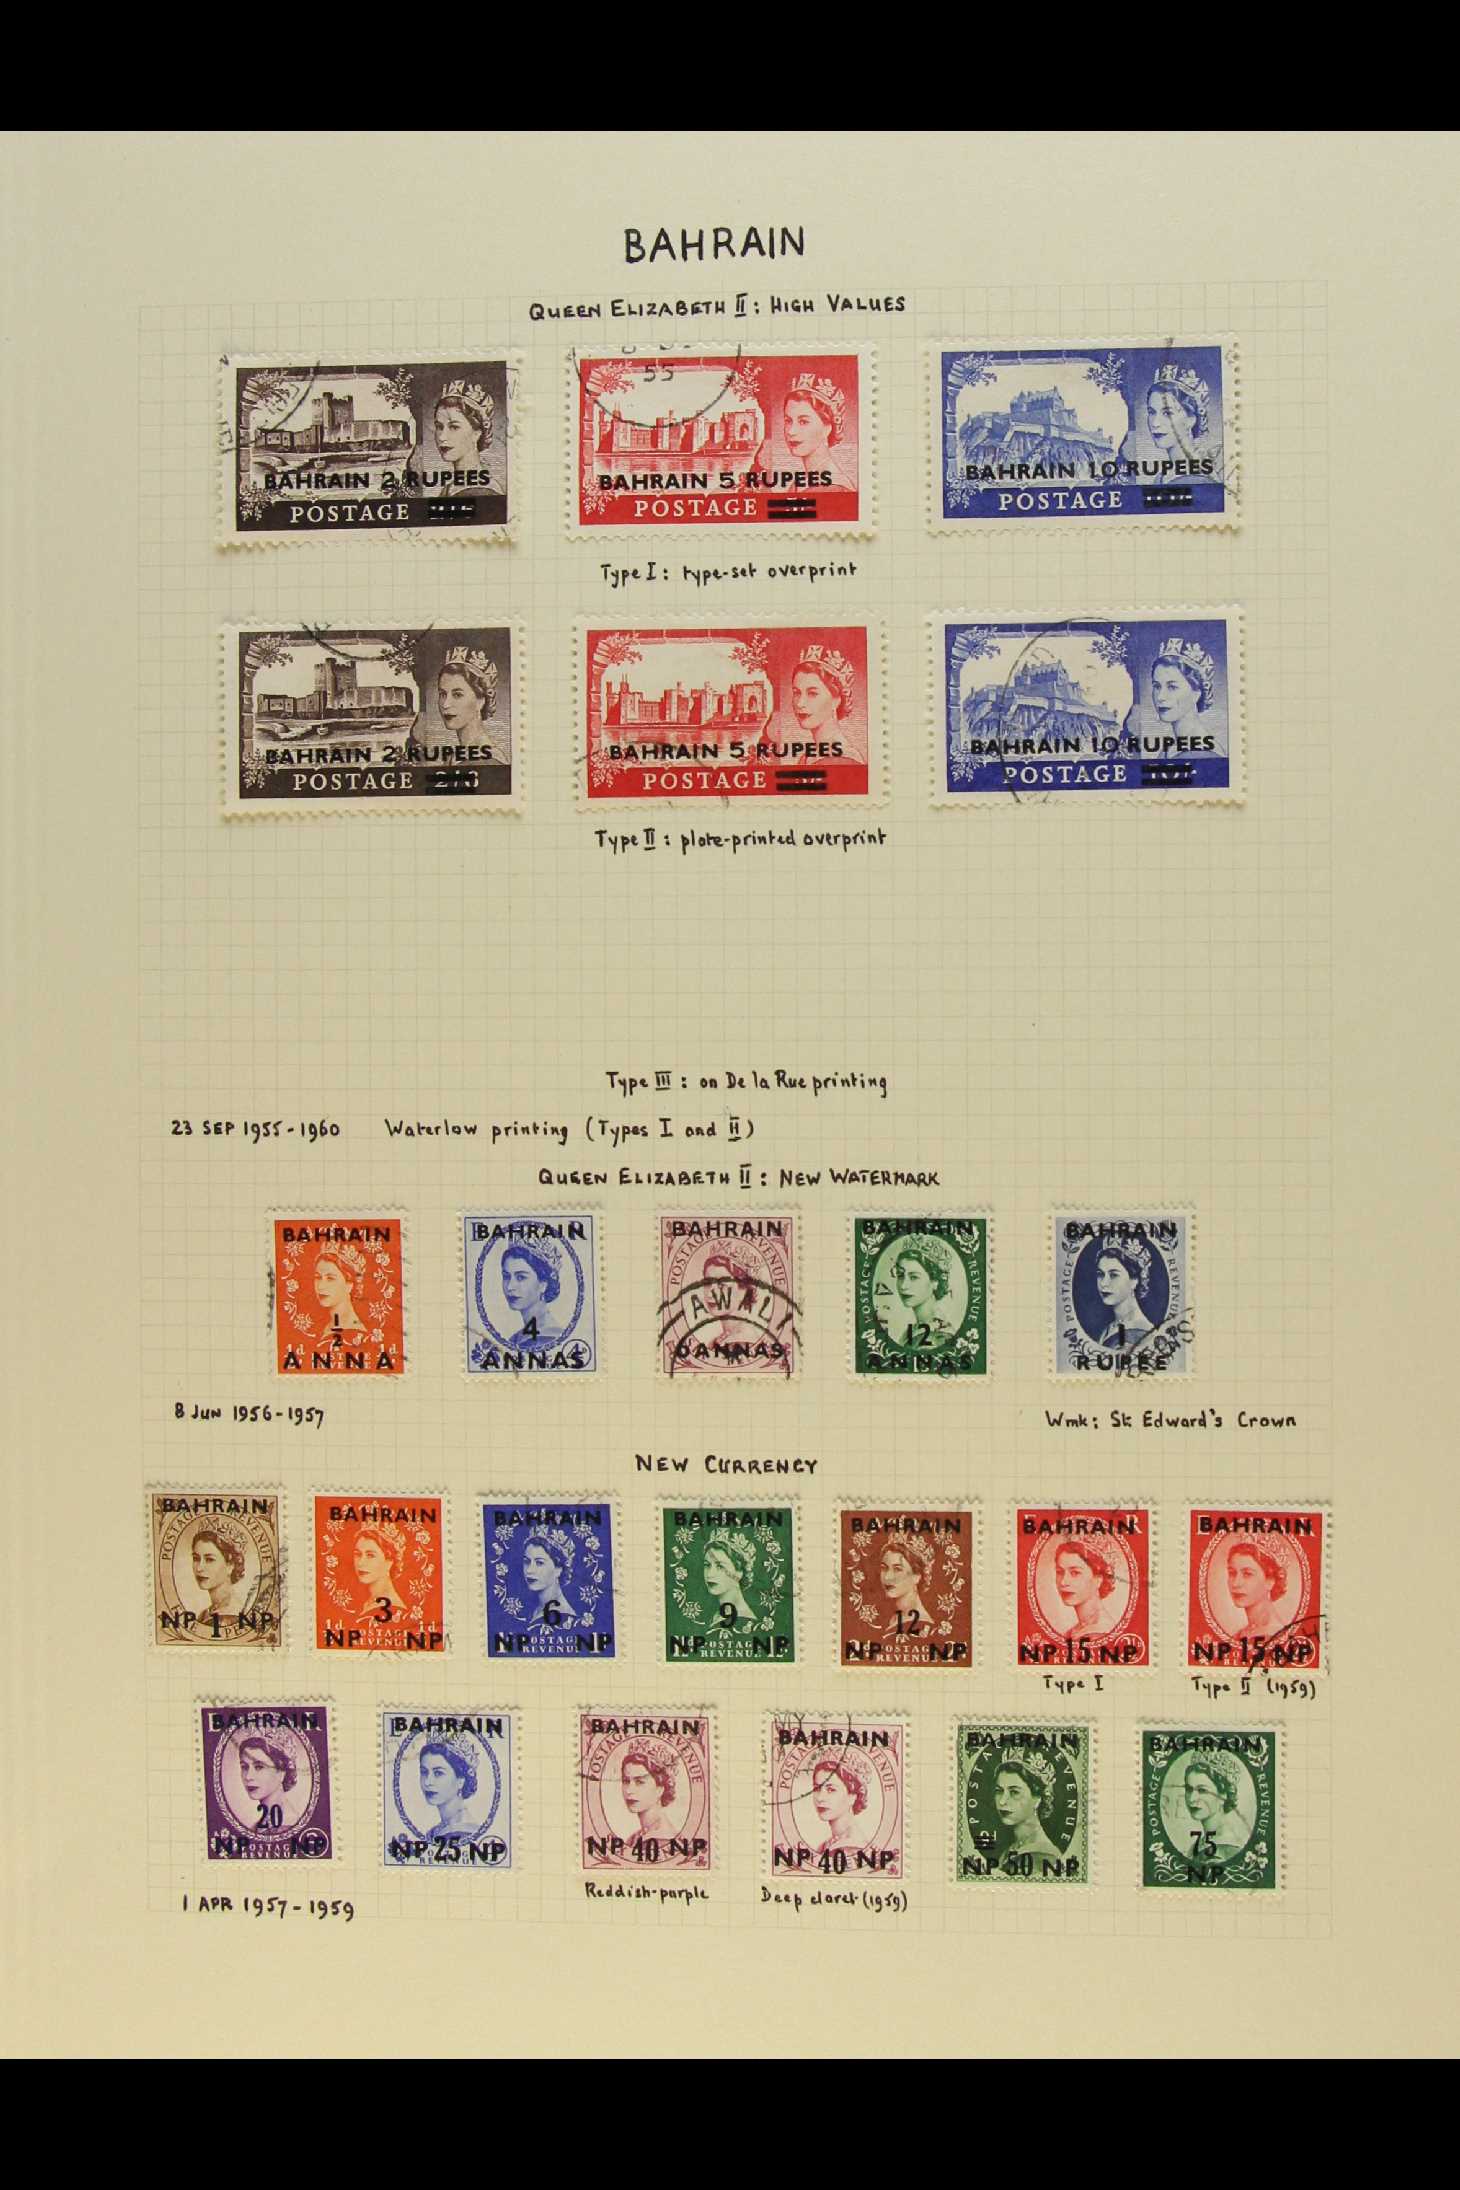 BAHRAIN 1950 - 1964 FINE USED COLLECTION on album pages includes a complete run of QEII issues (SG